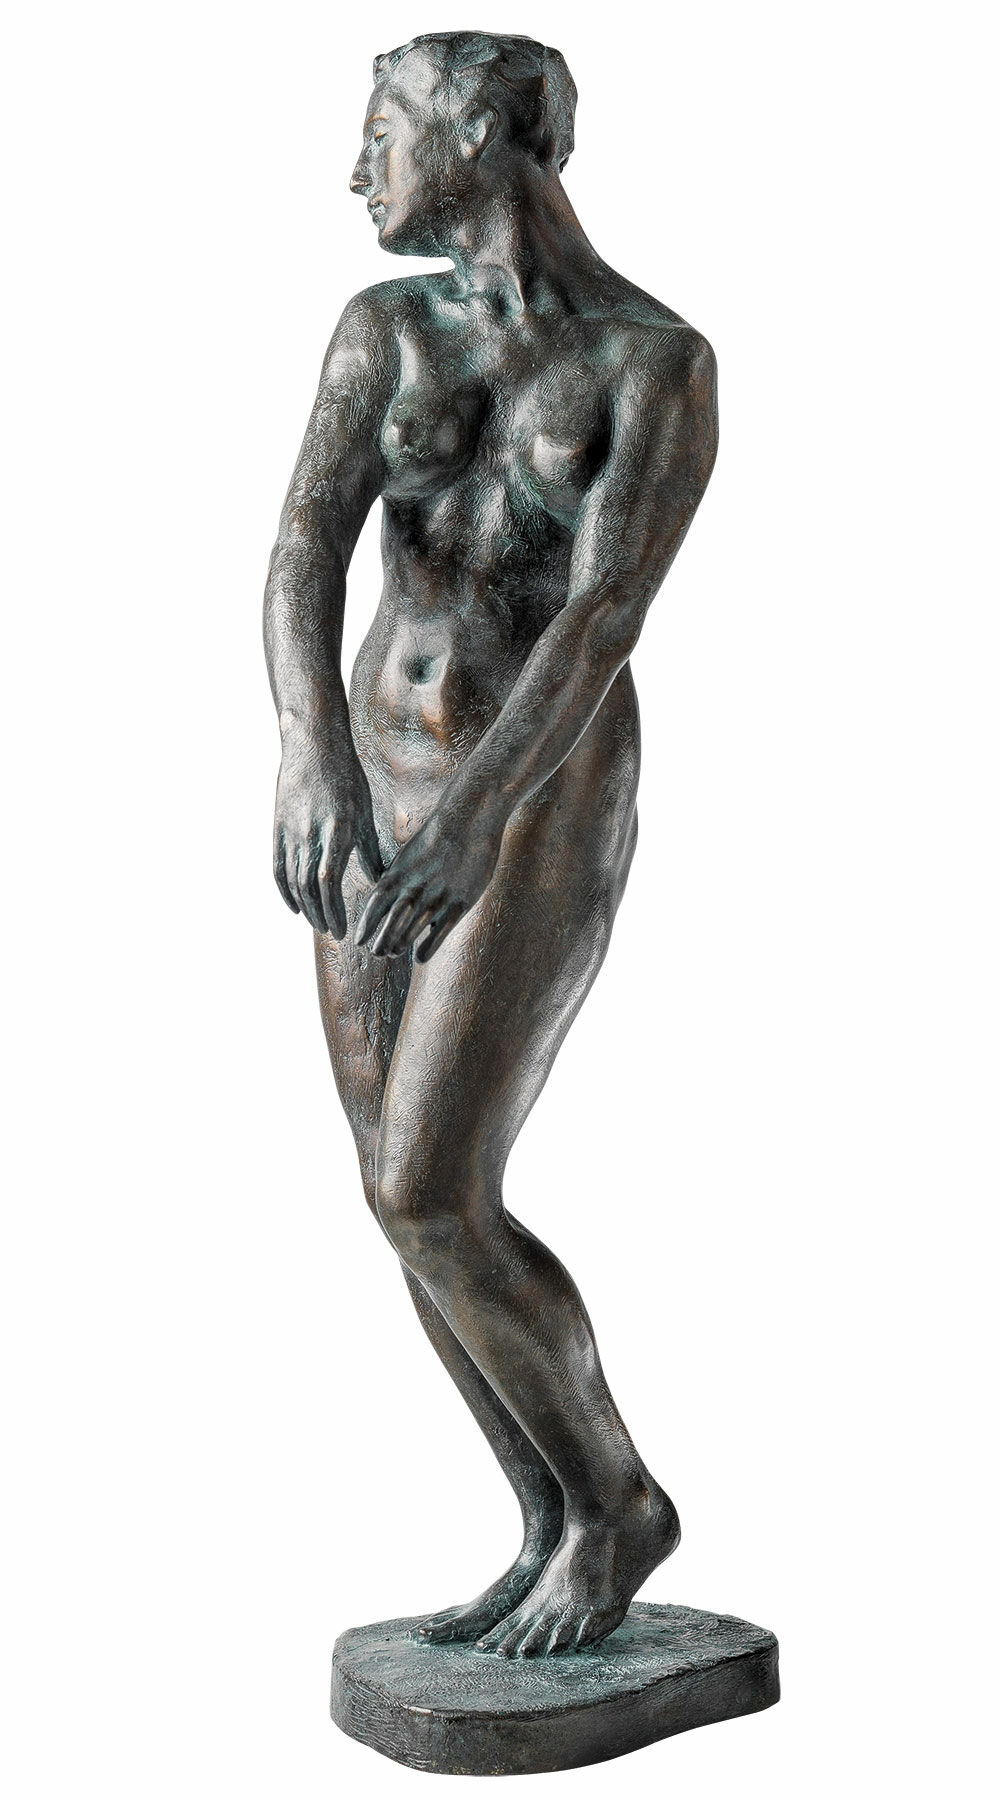 Sculpture "Young Woman" (1903/04), reduction in bronze by Georg Kolbe